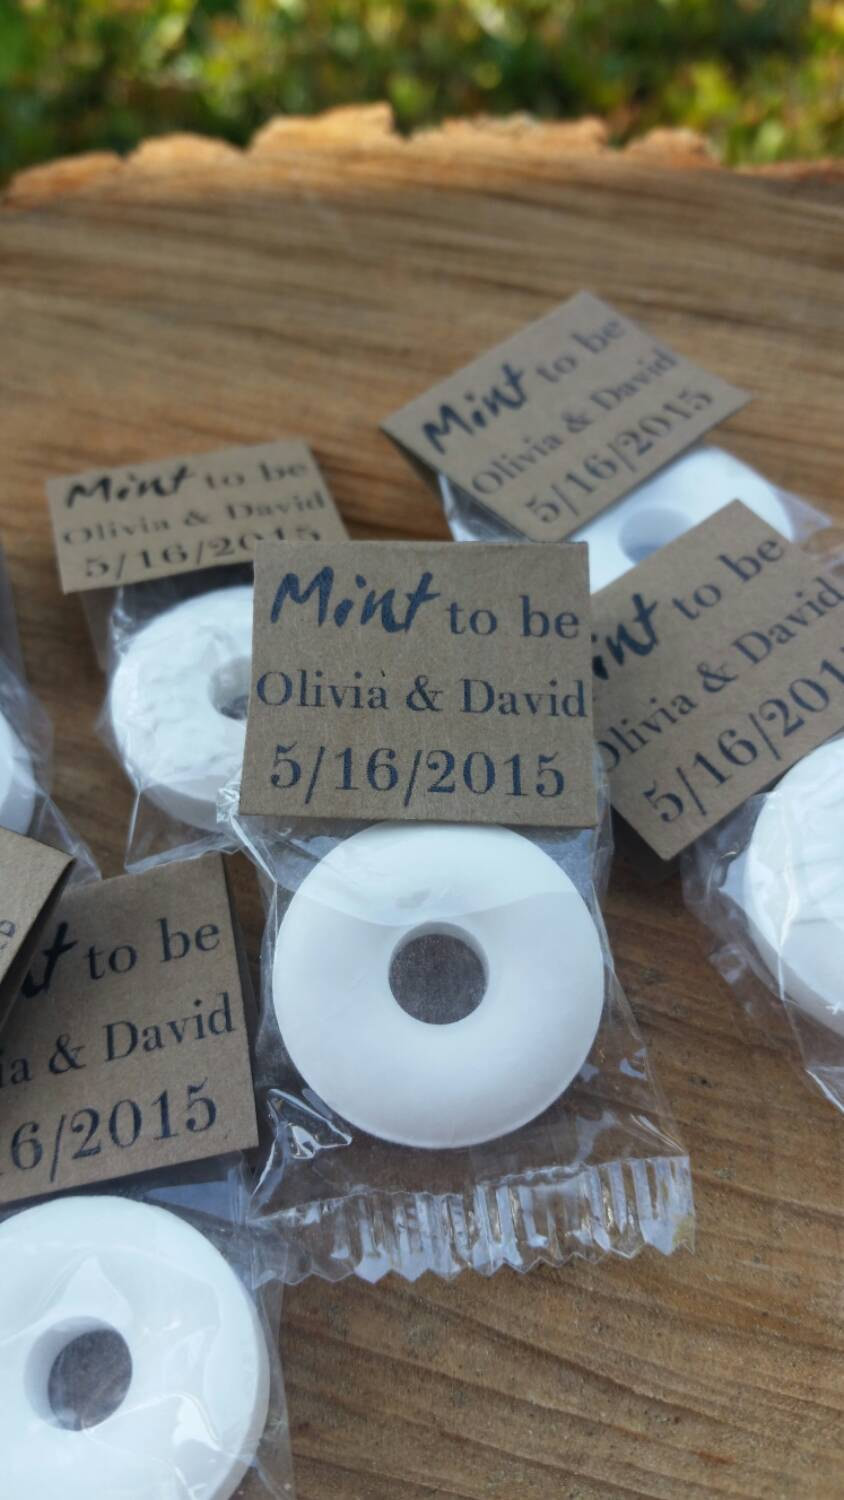 Wedding Favor Discount
 100 Mint to be wedding favors Rustic wedding by TagItWithLove